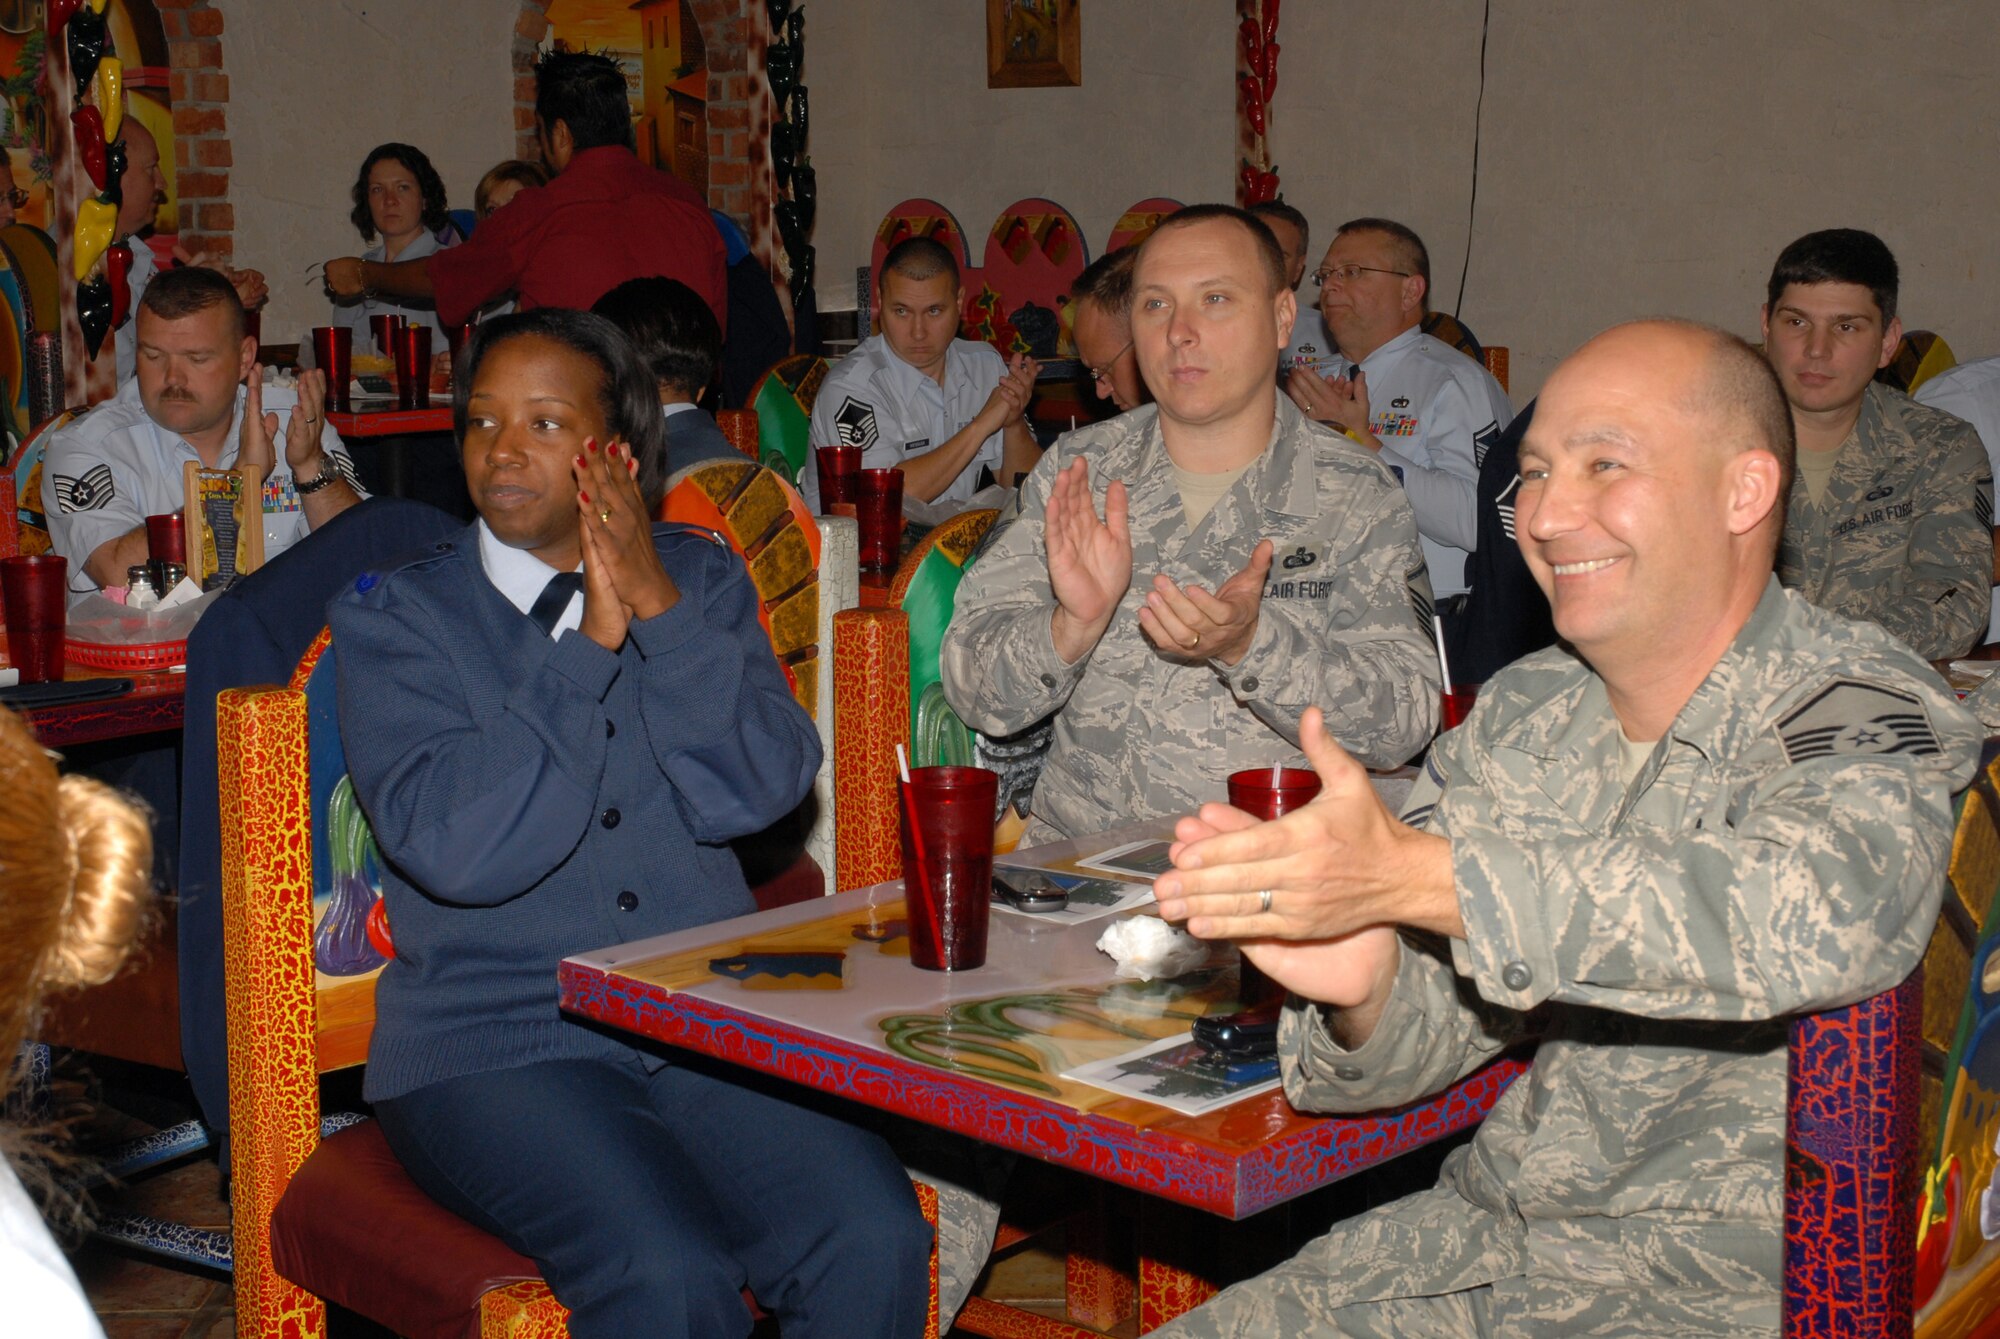 McGHEE TYSON AIR NATIONAL GUARD BASE, Tenn. -- Staff, friends and family of The I.G. Brown Air National Guard Training and Education Center here gather at a local restaurant to honor and bid farewell to Edna C. Davis, secretary, upon her retirement from civil service, Nov. 23, 2009. Davis worked for 17 years as the secretary for the Academy of Military Science, the Air National Guard's officer commissioning program.  (U.S. Air Force photo by Master Sgt. Mavi Smith/Released)